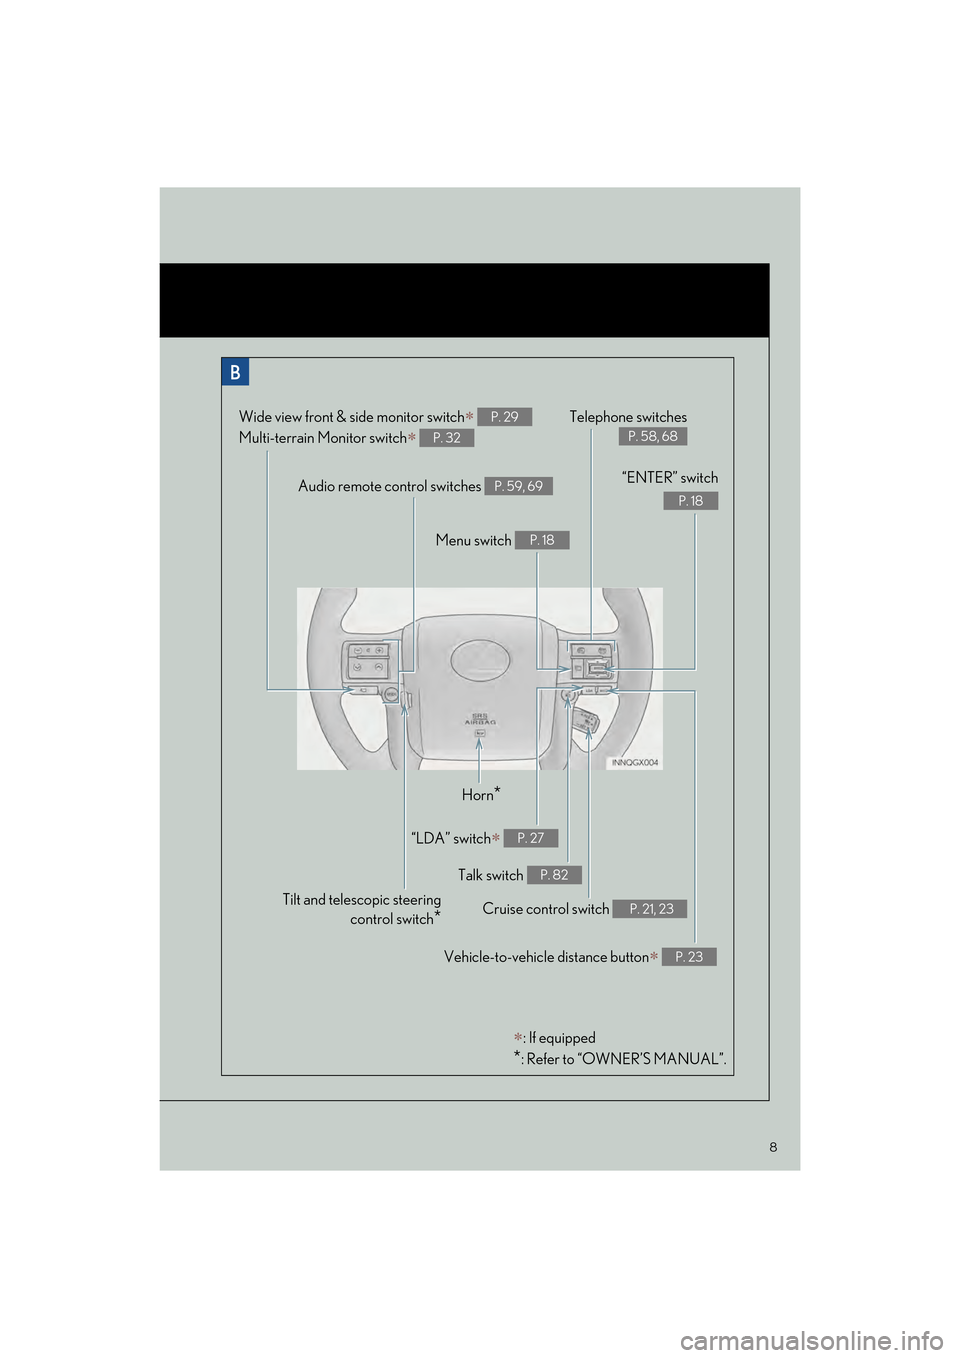 Lexus GX460 2017  Quick Guide 8
GX460_QG_OM60P00U_(U)
Audio remote control switches P. 59, 69
Telephone switches
P. 58, 68
Menu switch P. 18
“ENTER” switch
P. 18
Wide view front & side monitor switch∗ 
Multi-terrain Monitor 